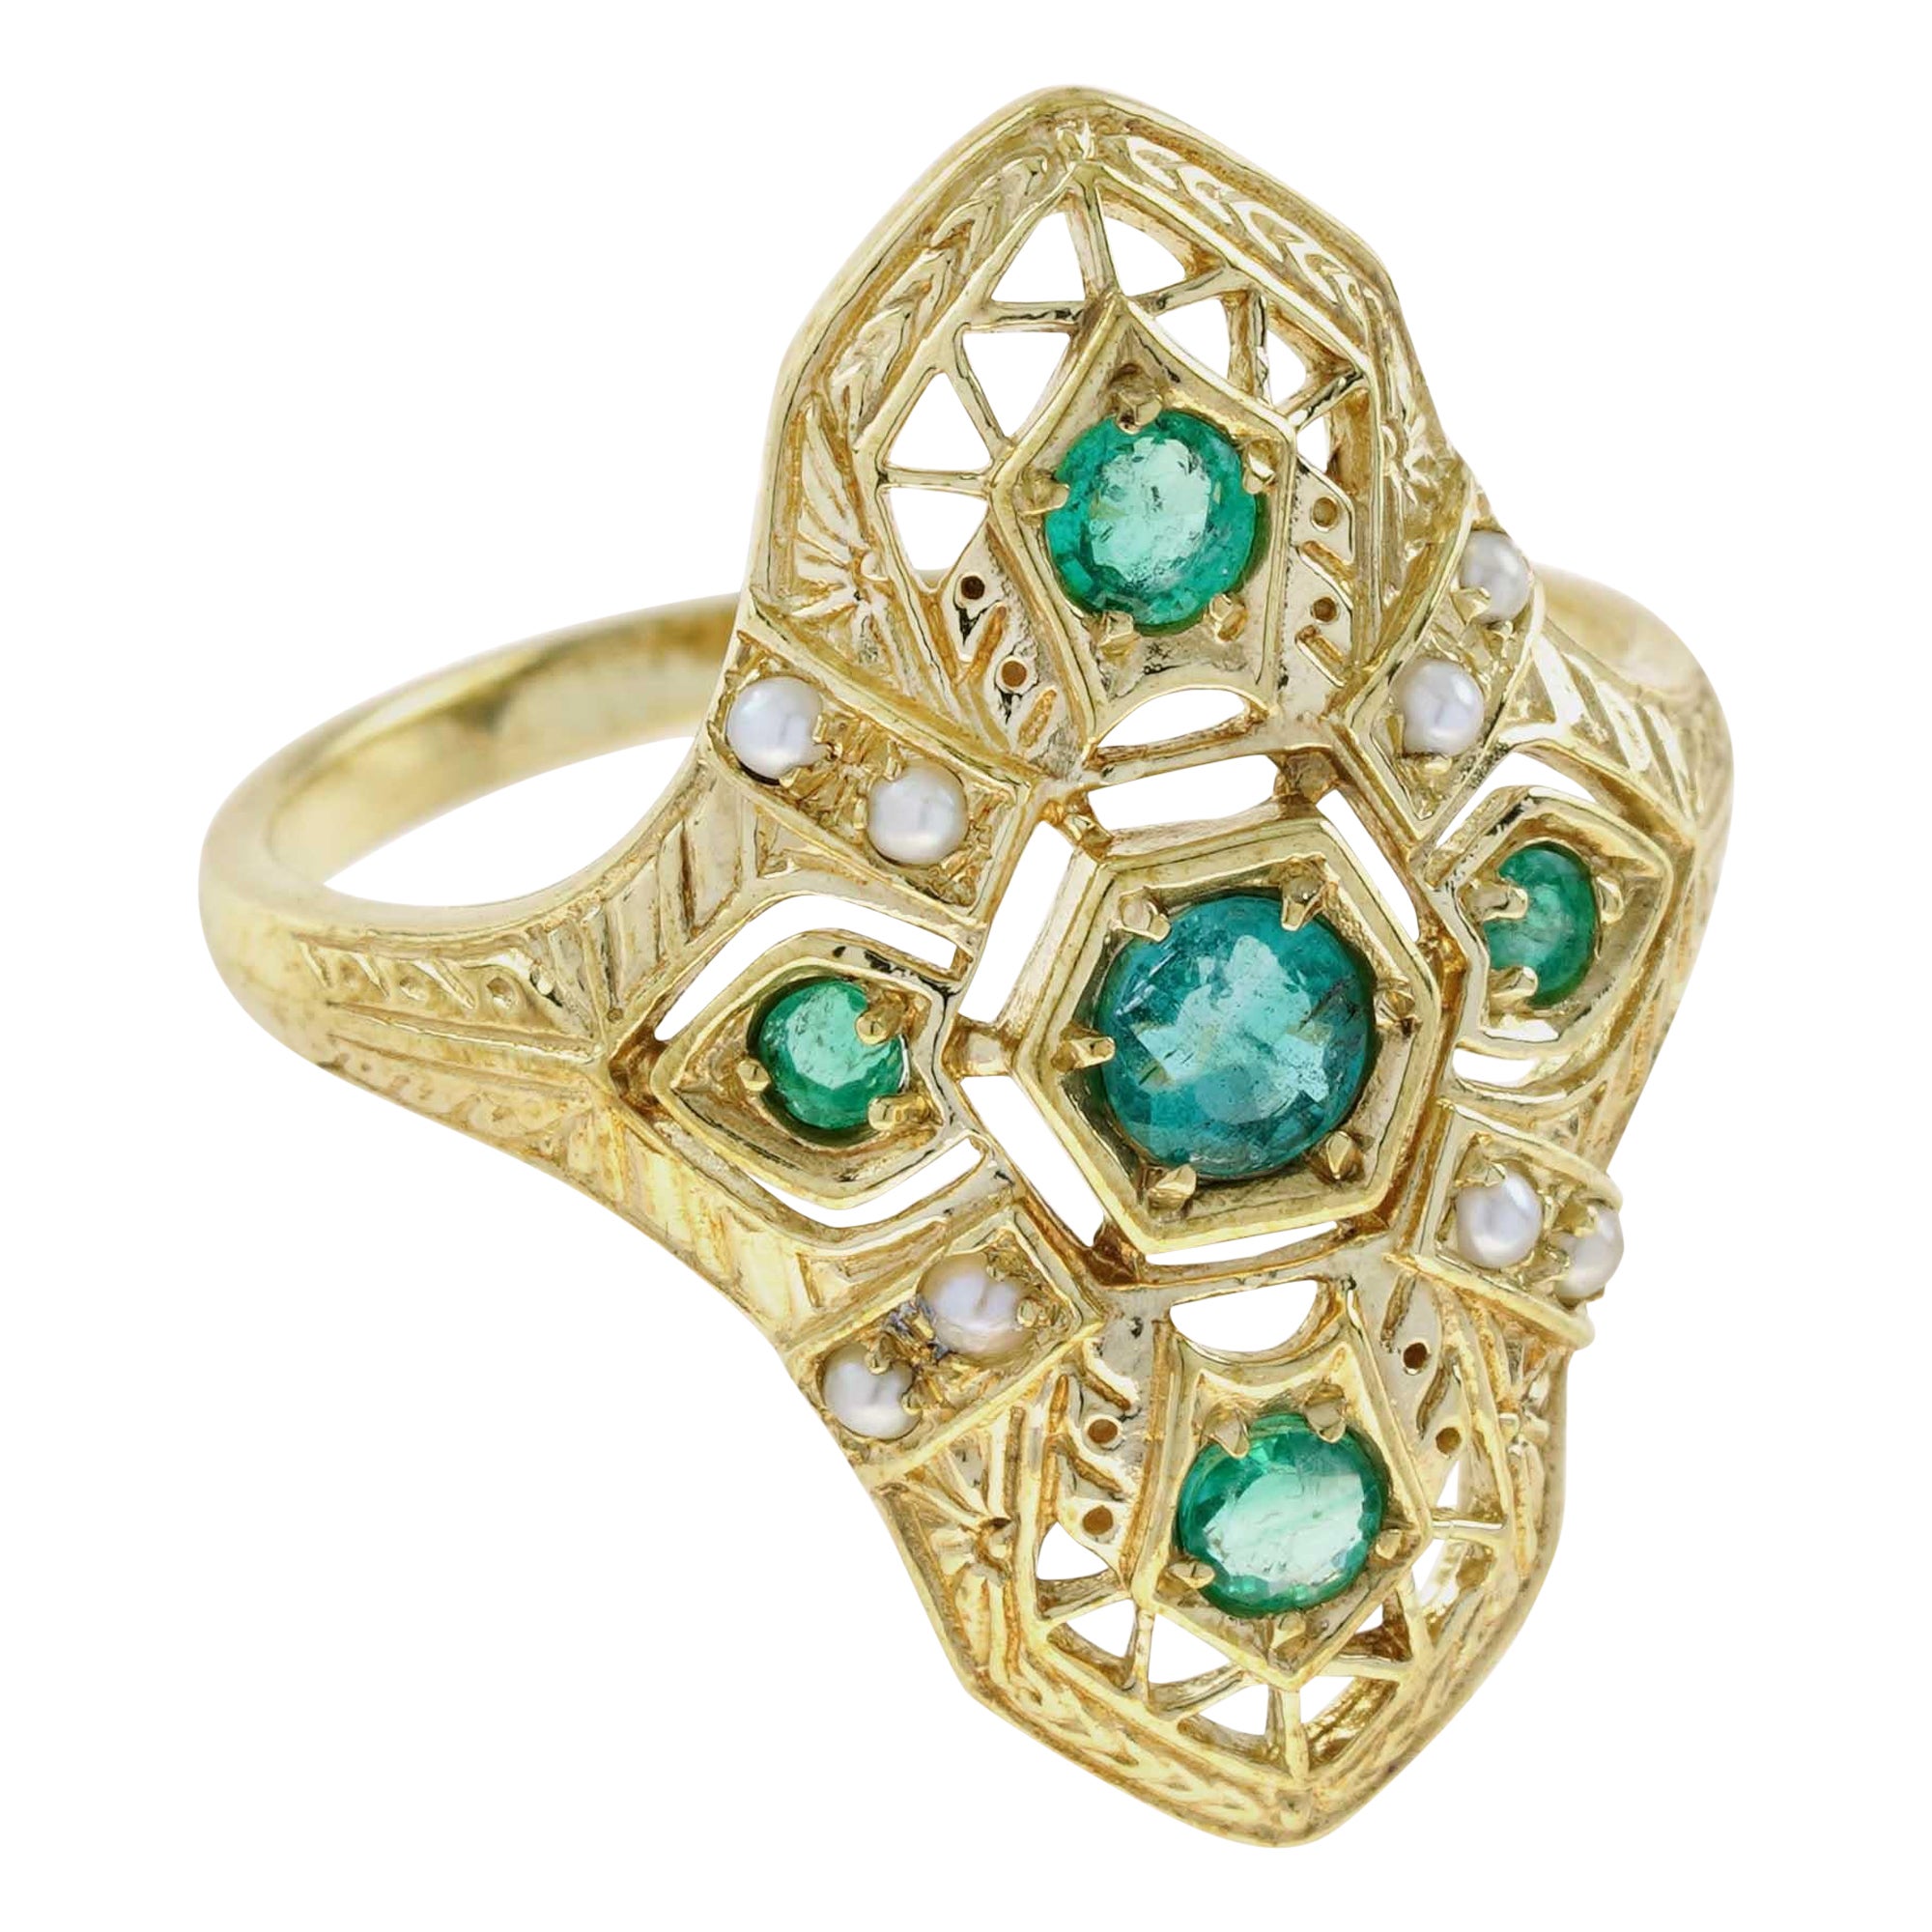 For Sale:  Natural Emerald and Pearl Art deco Style Geometric Three Stone Ring in 9K Gold